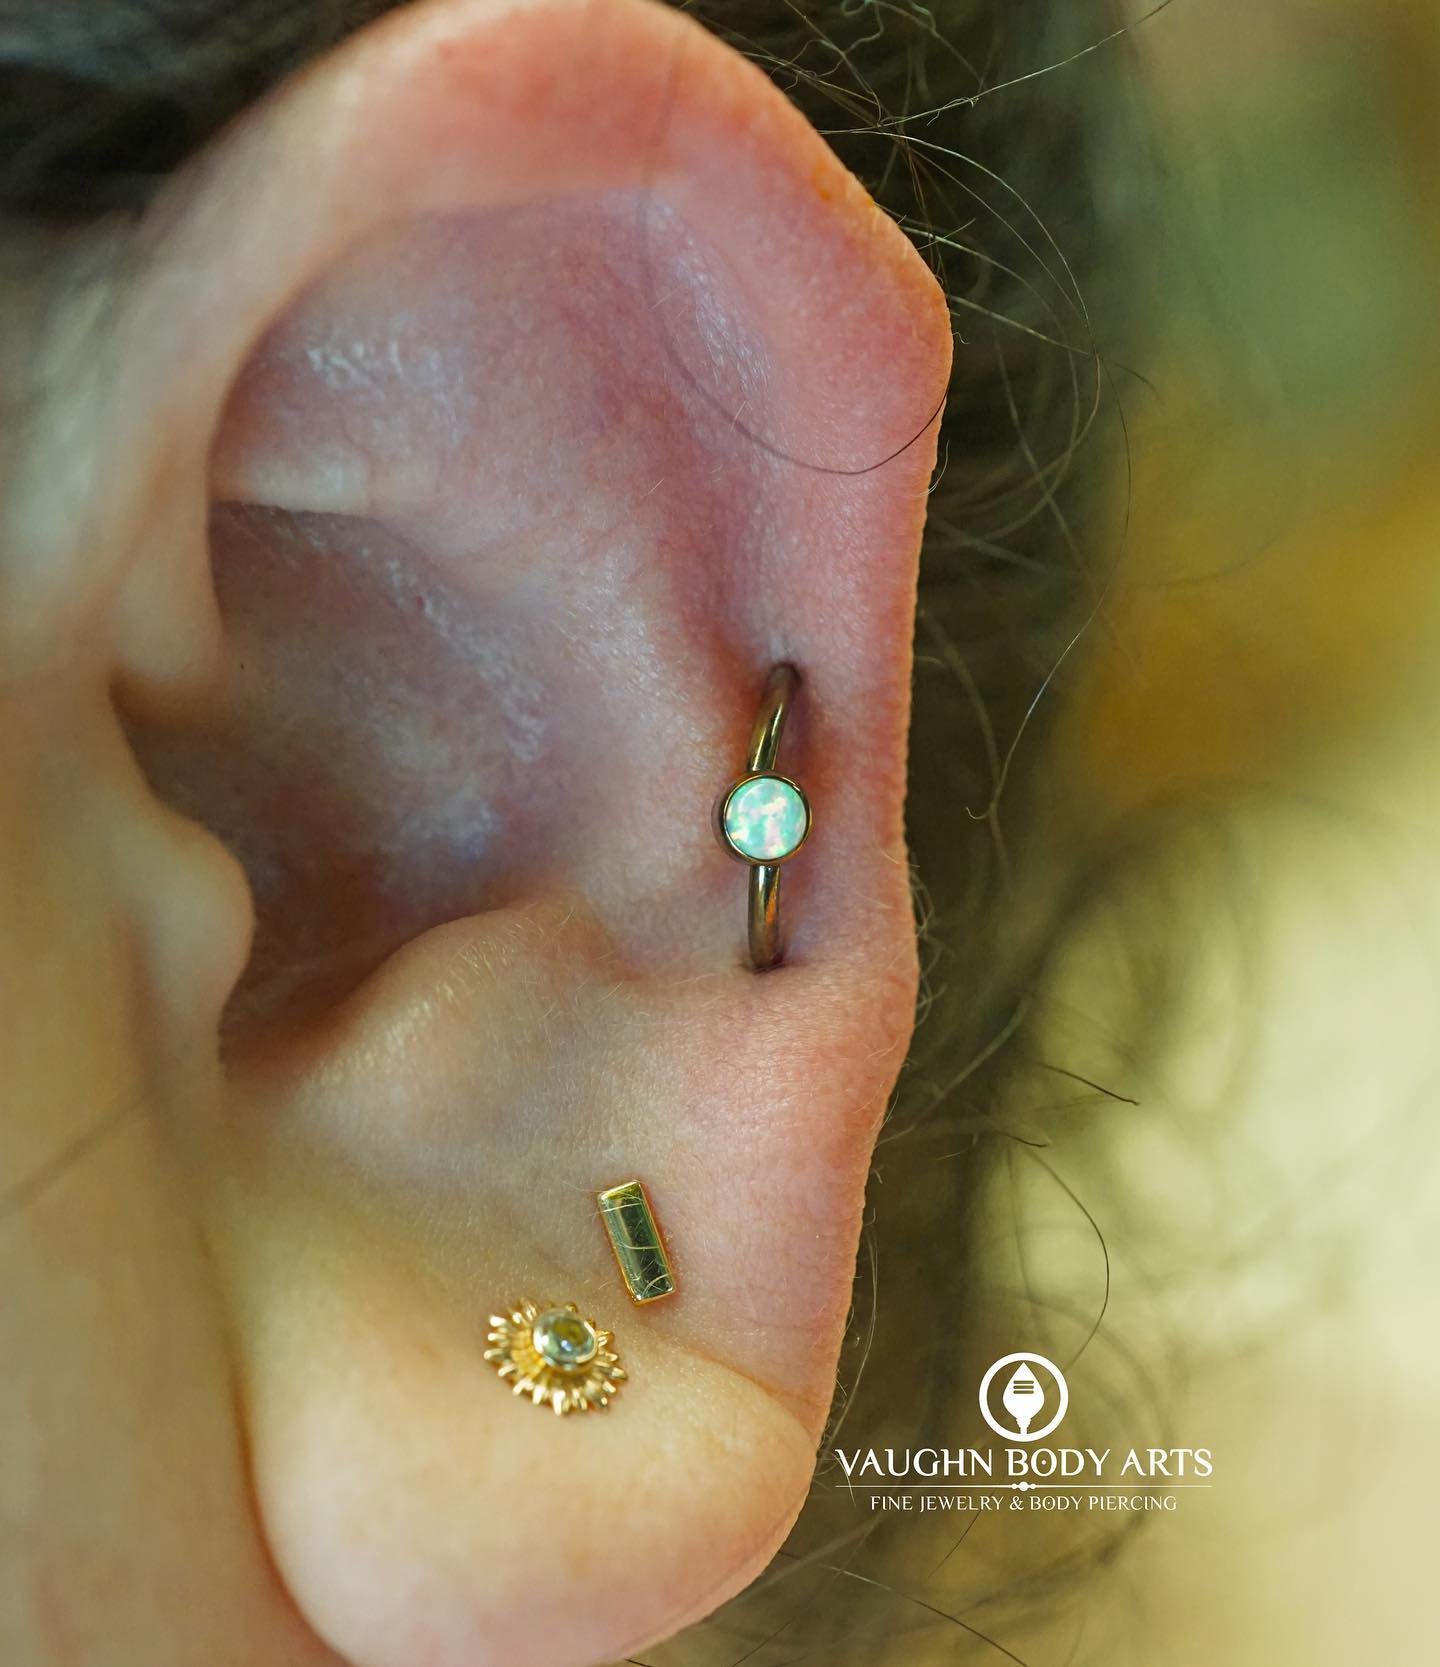 Here&rsquo;s a super fun orbital piercing we got to do for our awesome client Tracy last month. 

We anodized a niobium captive bead ring into a bronzy color with a bezel set white opal. 

Thank you so much Tracy, this looks so awesome on you! 

#vau